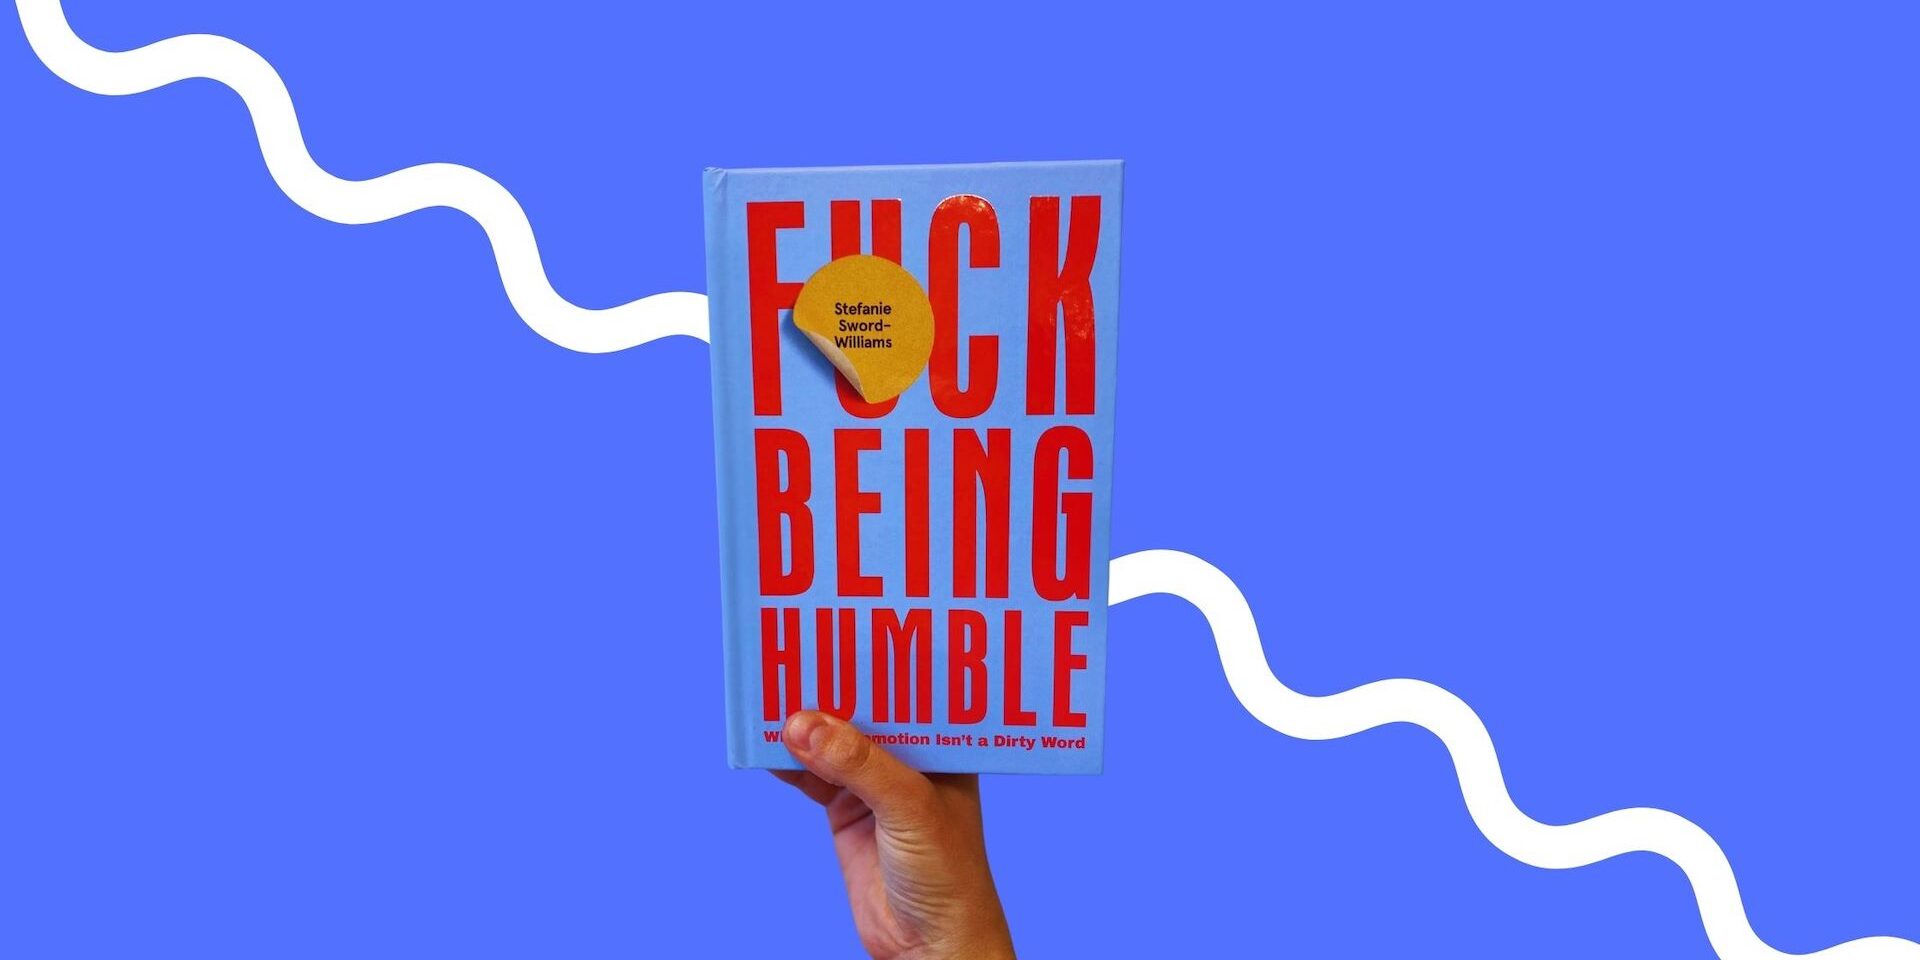 Top 5 Books for modern-day businesswomen headers. F&ck being humble held up